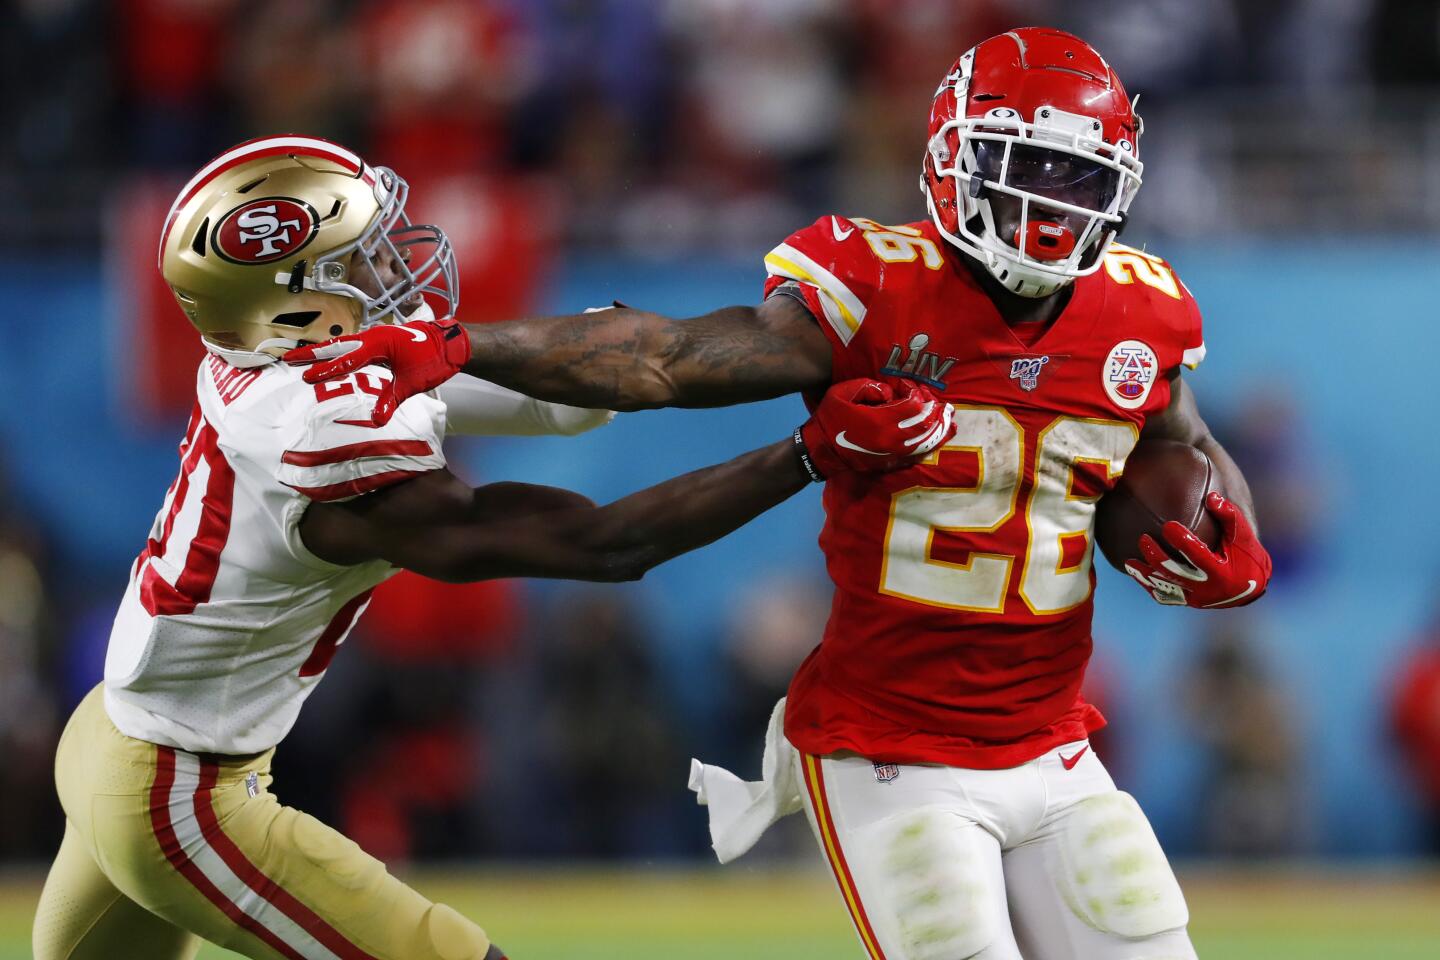 Kansas City Chiefs running back Damien Williams gives a stiff arm to San Francisco 49ers cornerback Jimmie Ward during the fourth quarter of Super Bowl LIV.